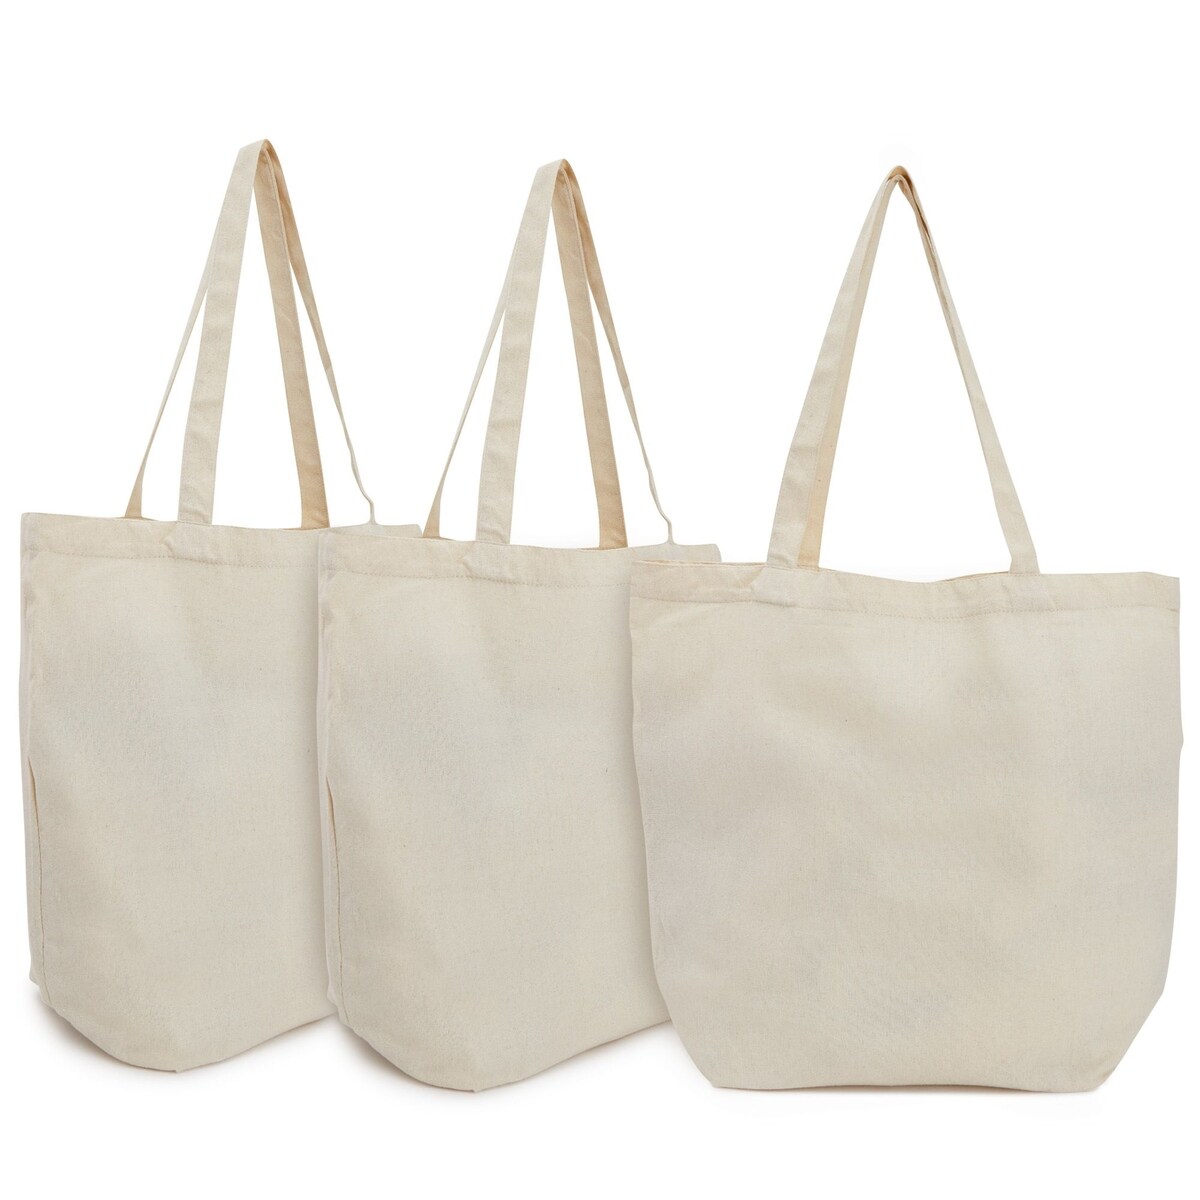 Reusable Canvas Grocery Bags, Non Woven Cloth Tote Bags with Handles for Shopping (16.5 x 19.5 In, 3 Pack)